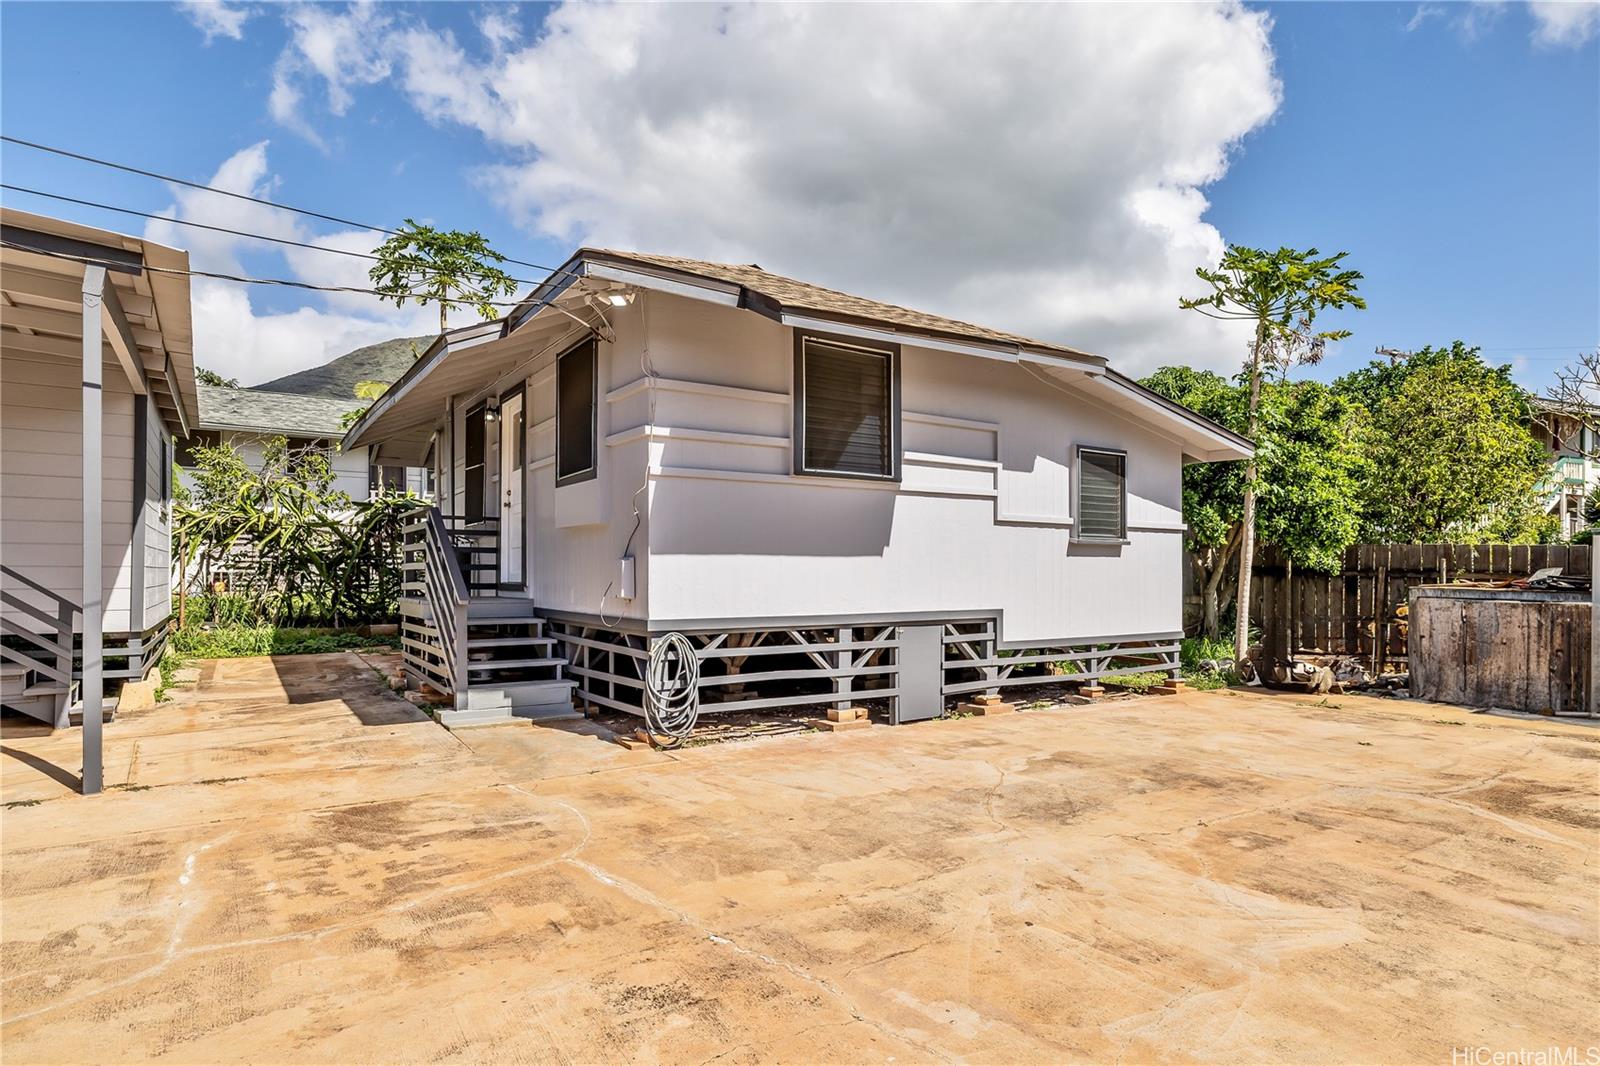 87-269 Auyong Homestead Road, Waianae, Hawaii, 96792, United States, 6 Bedrooms Bedrooms, ,3 BathroomsBathrooms,Residential,For Sale,87-269 auyong homestead RD,1475572